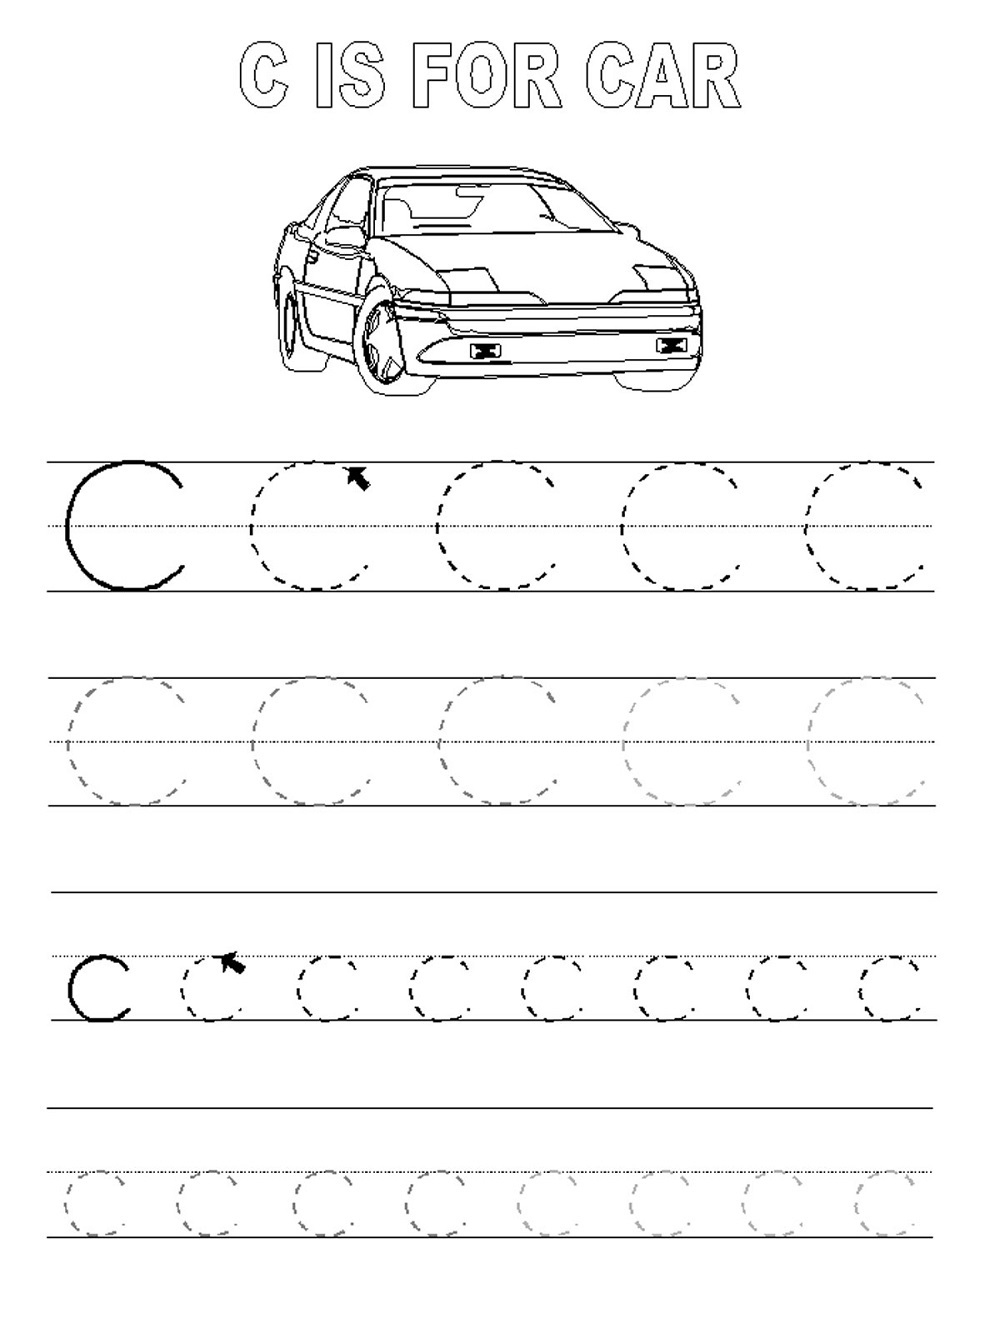 Abc Traceable Worksheets For Kids Activity | Kiddo Shelter | Traceable Abc Printable Worksheets